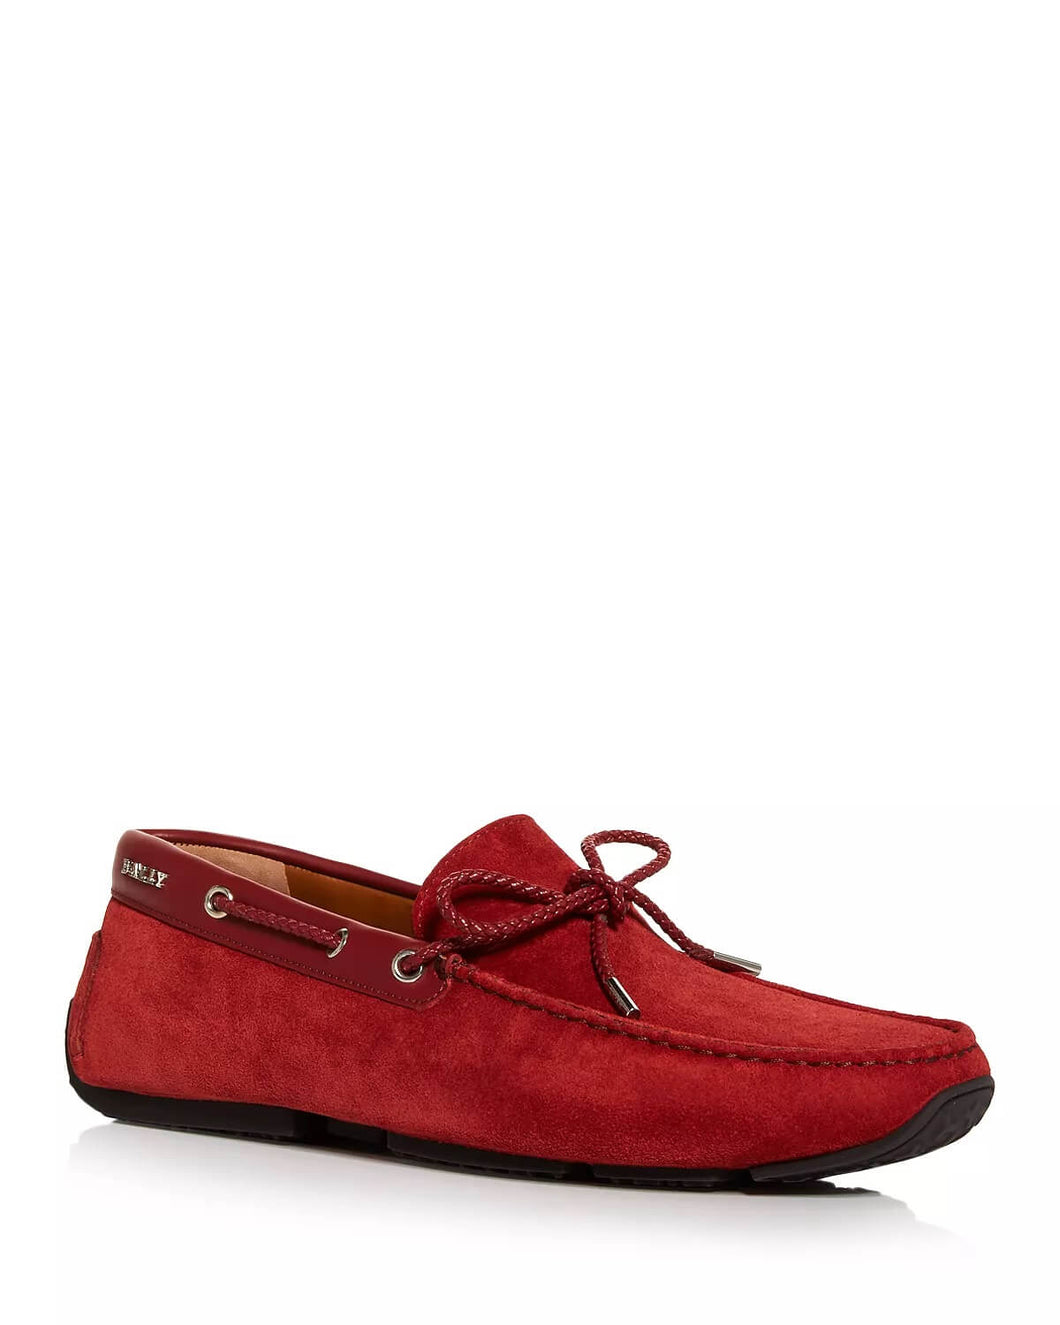 NEW Bally Pindar Men's 6231347 Red Leather Suede Drivers US 9.5 MSRP $475